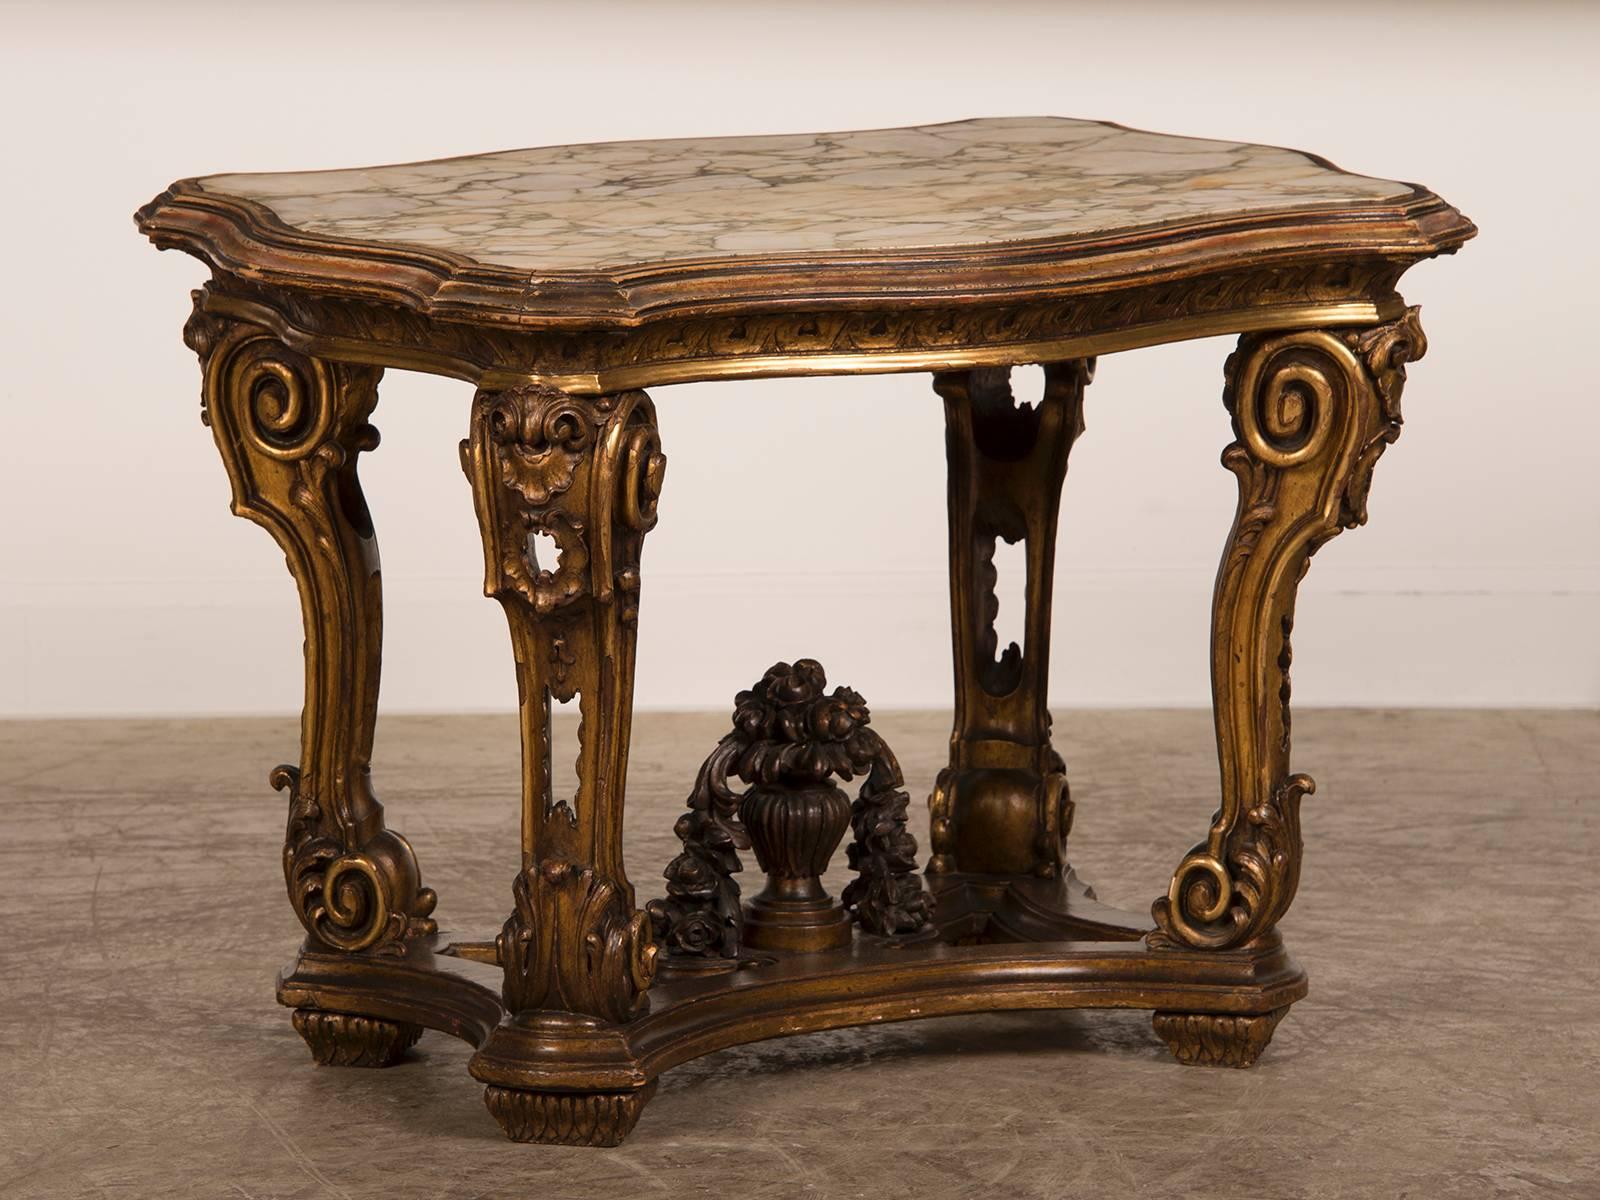 Receive our new selections direct from 1stdibs by email each week. Please click “Follow Dealer” button below and see them first!

A splendid antique Italian gilded wood table from the Belle Époque period, circa 1890. Please notice the extravagance